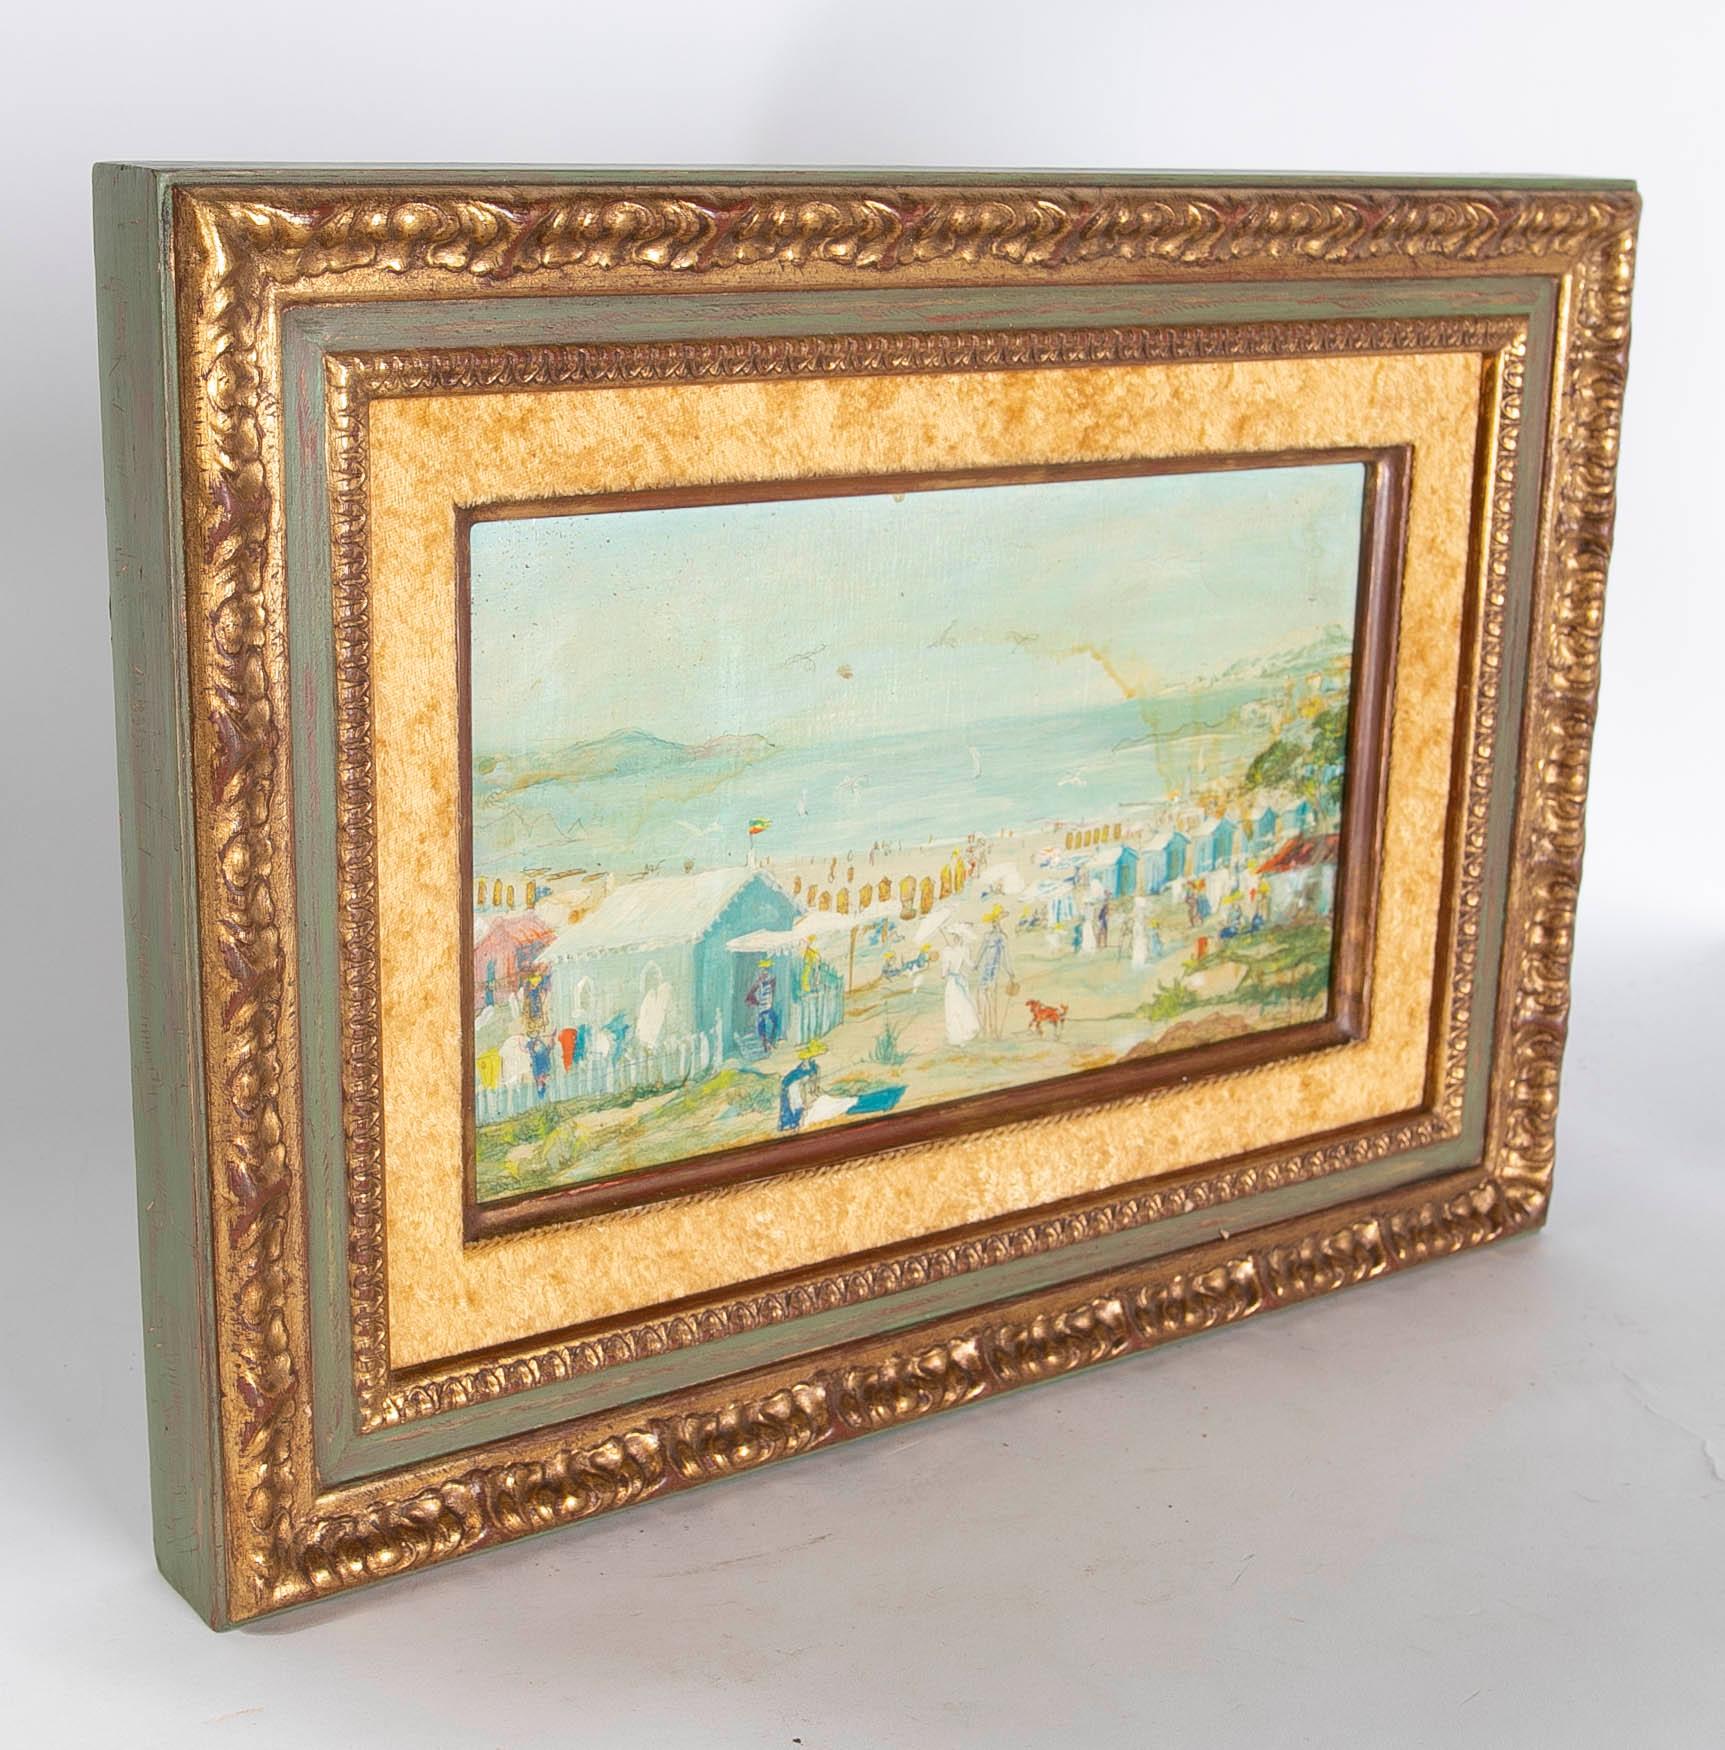 Tribute to the Impressionists Painted in Oil on Canvas 1976 Signed
Measurements with frame: 30x41x4cm.